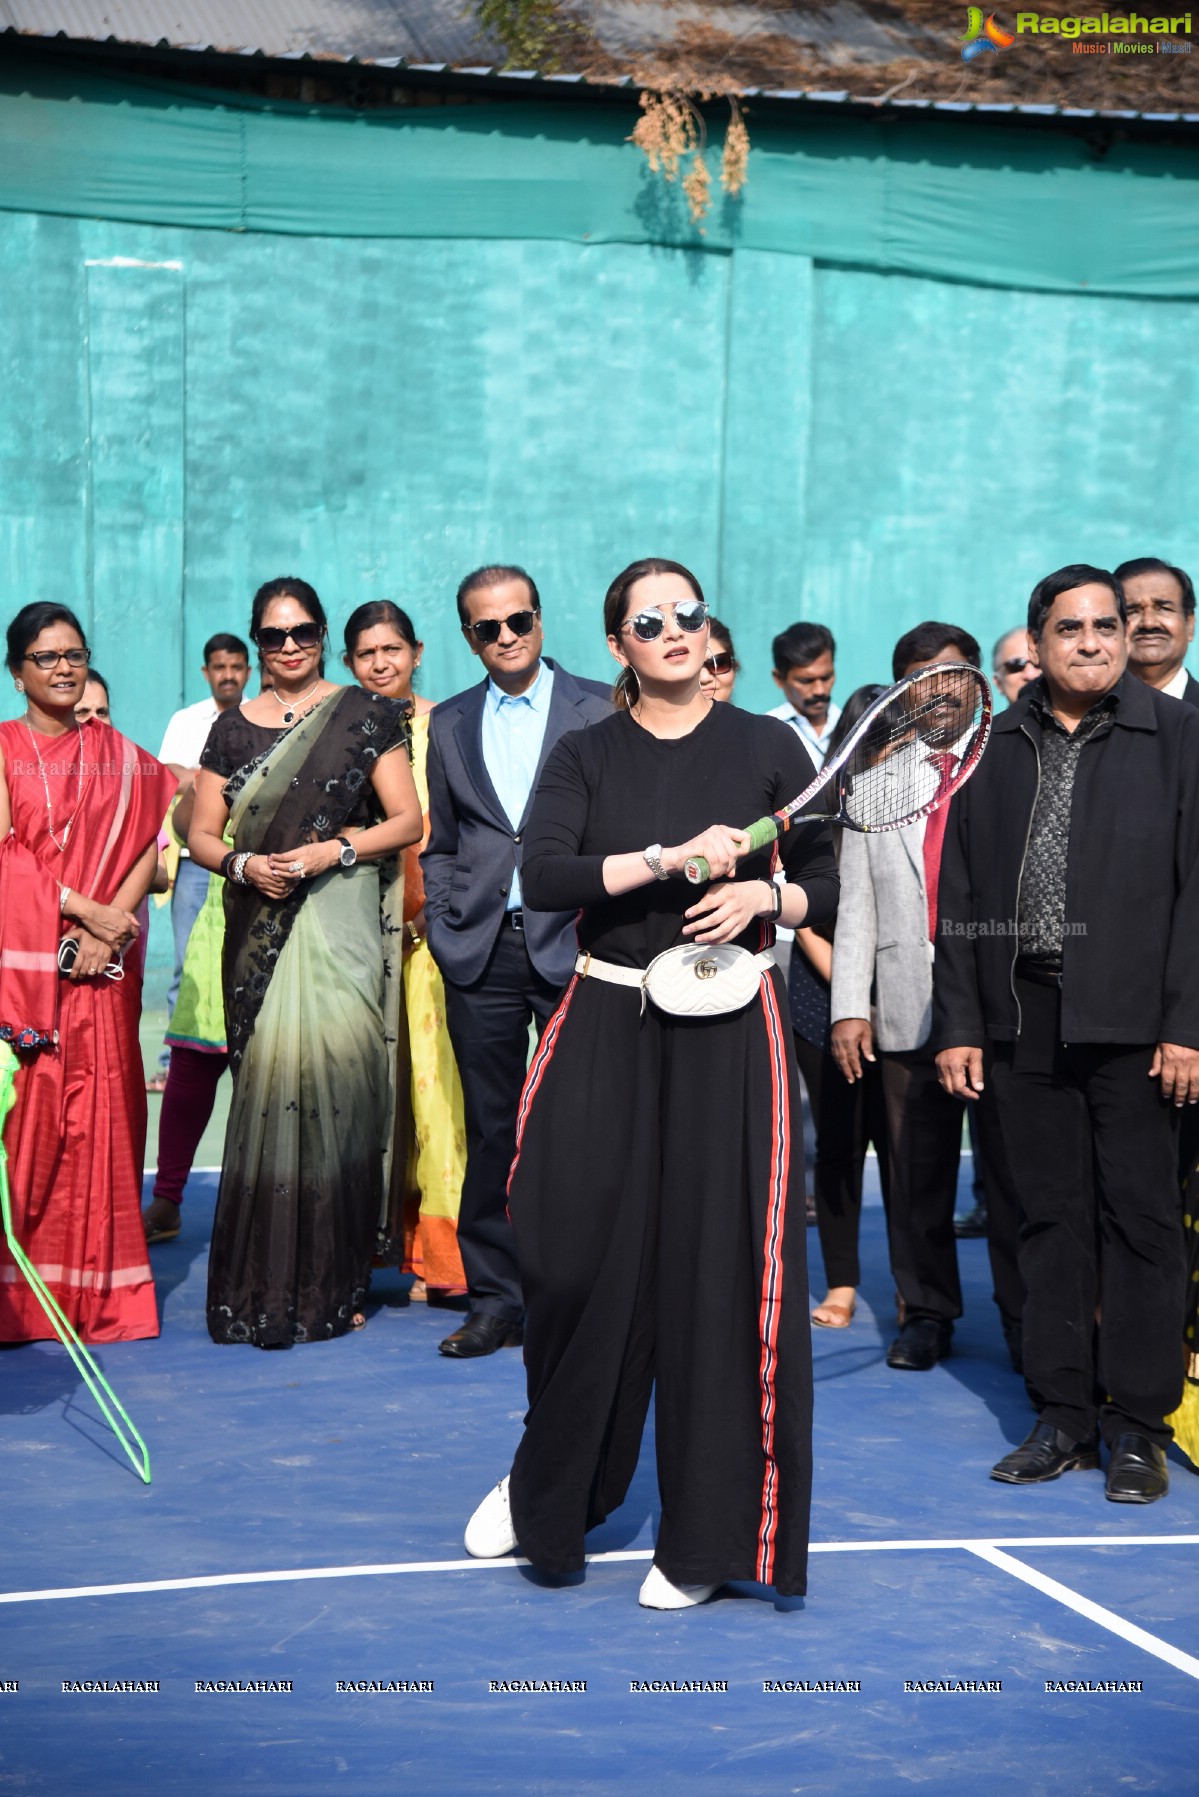 Tennis Ace Ms Sania Mirza Inaugurates Tennis Court at OMC & Valedictory of the MEGAREUNION of OSMECOS80 